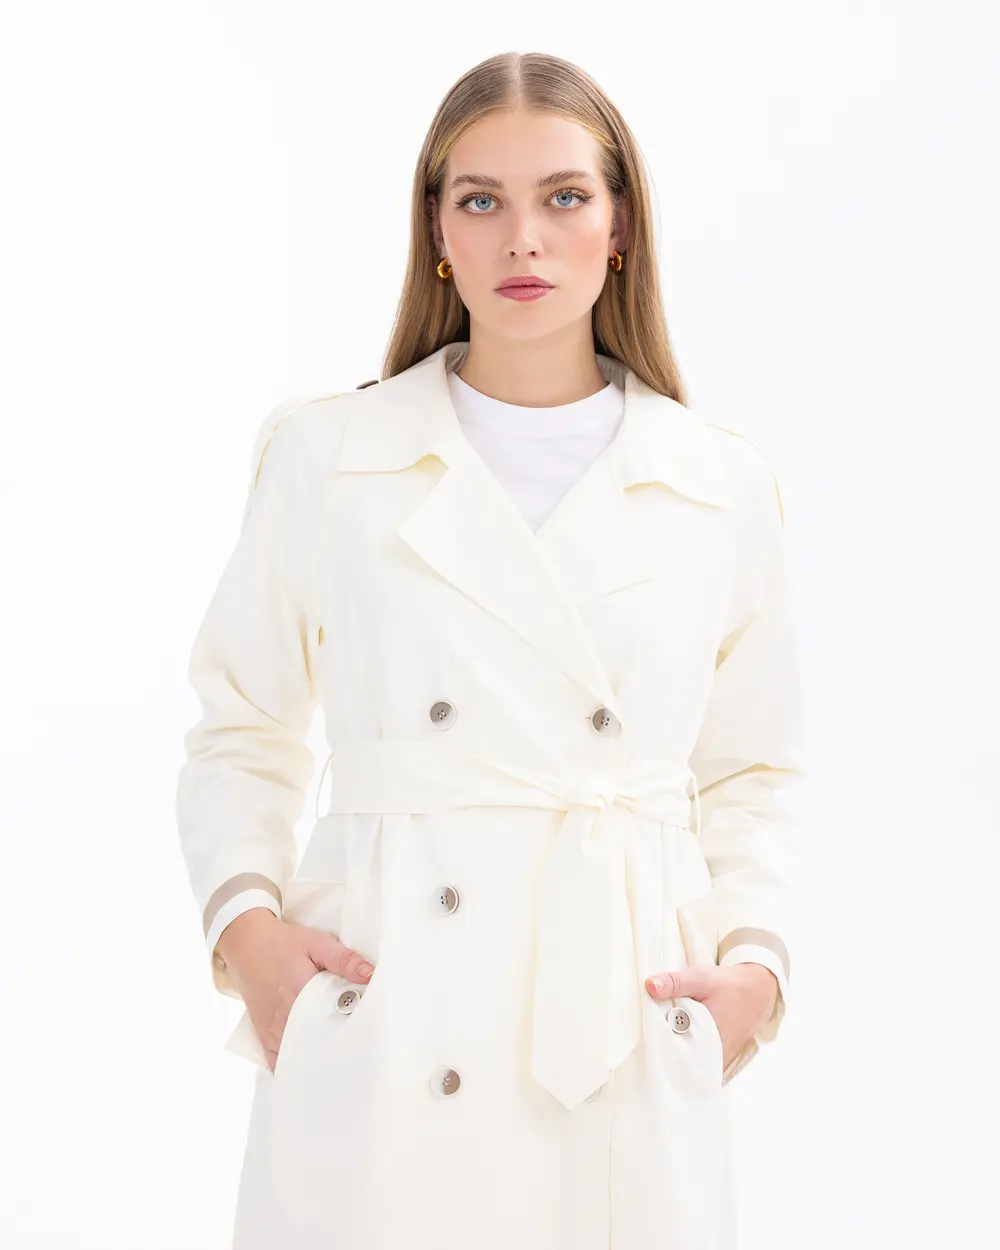 Lined Knee-length Trench Coat with Pocket Details